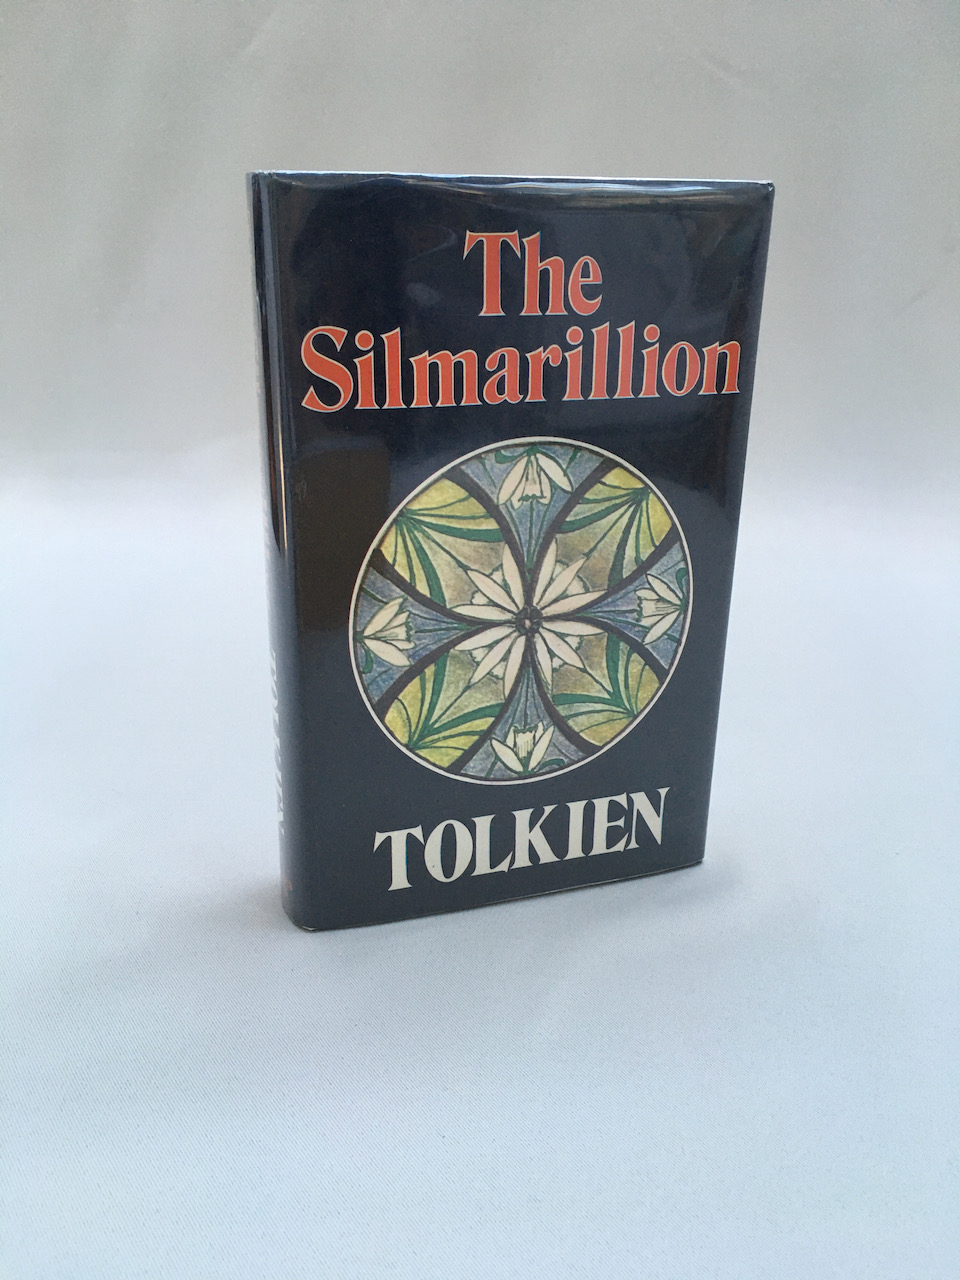 The Silmarillion, by Tolkien. Publisher salesman's sample, published by Allen & Unwin in 1977